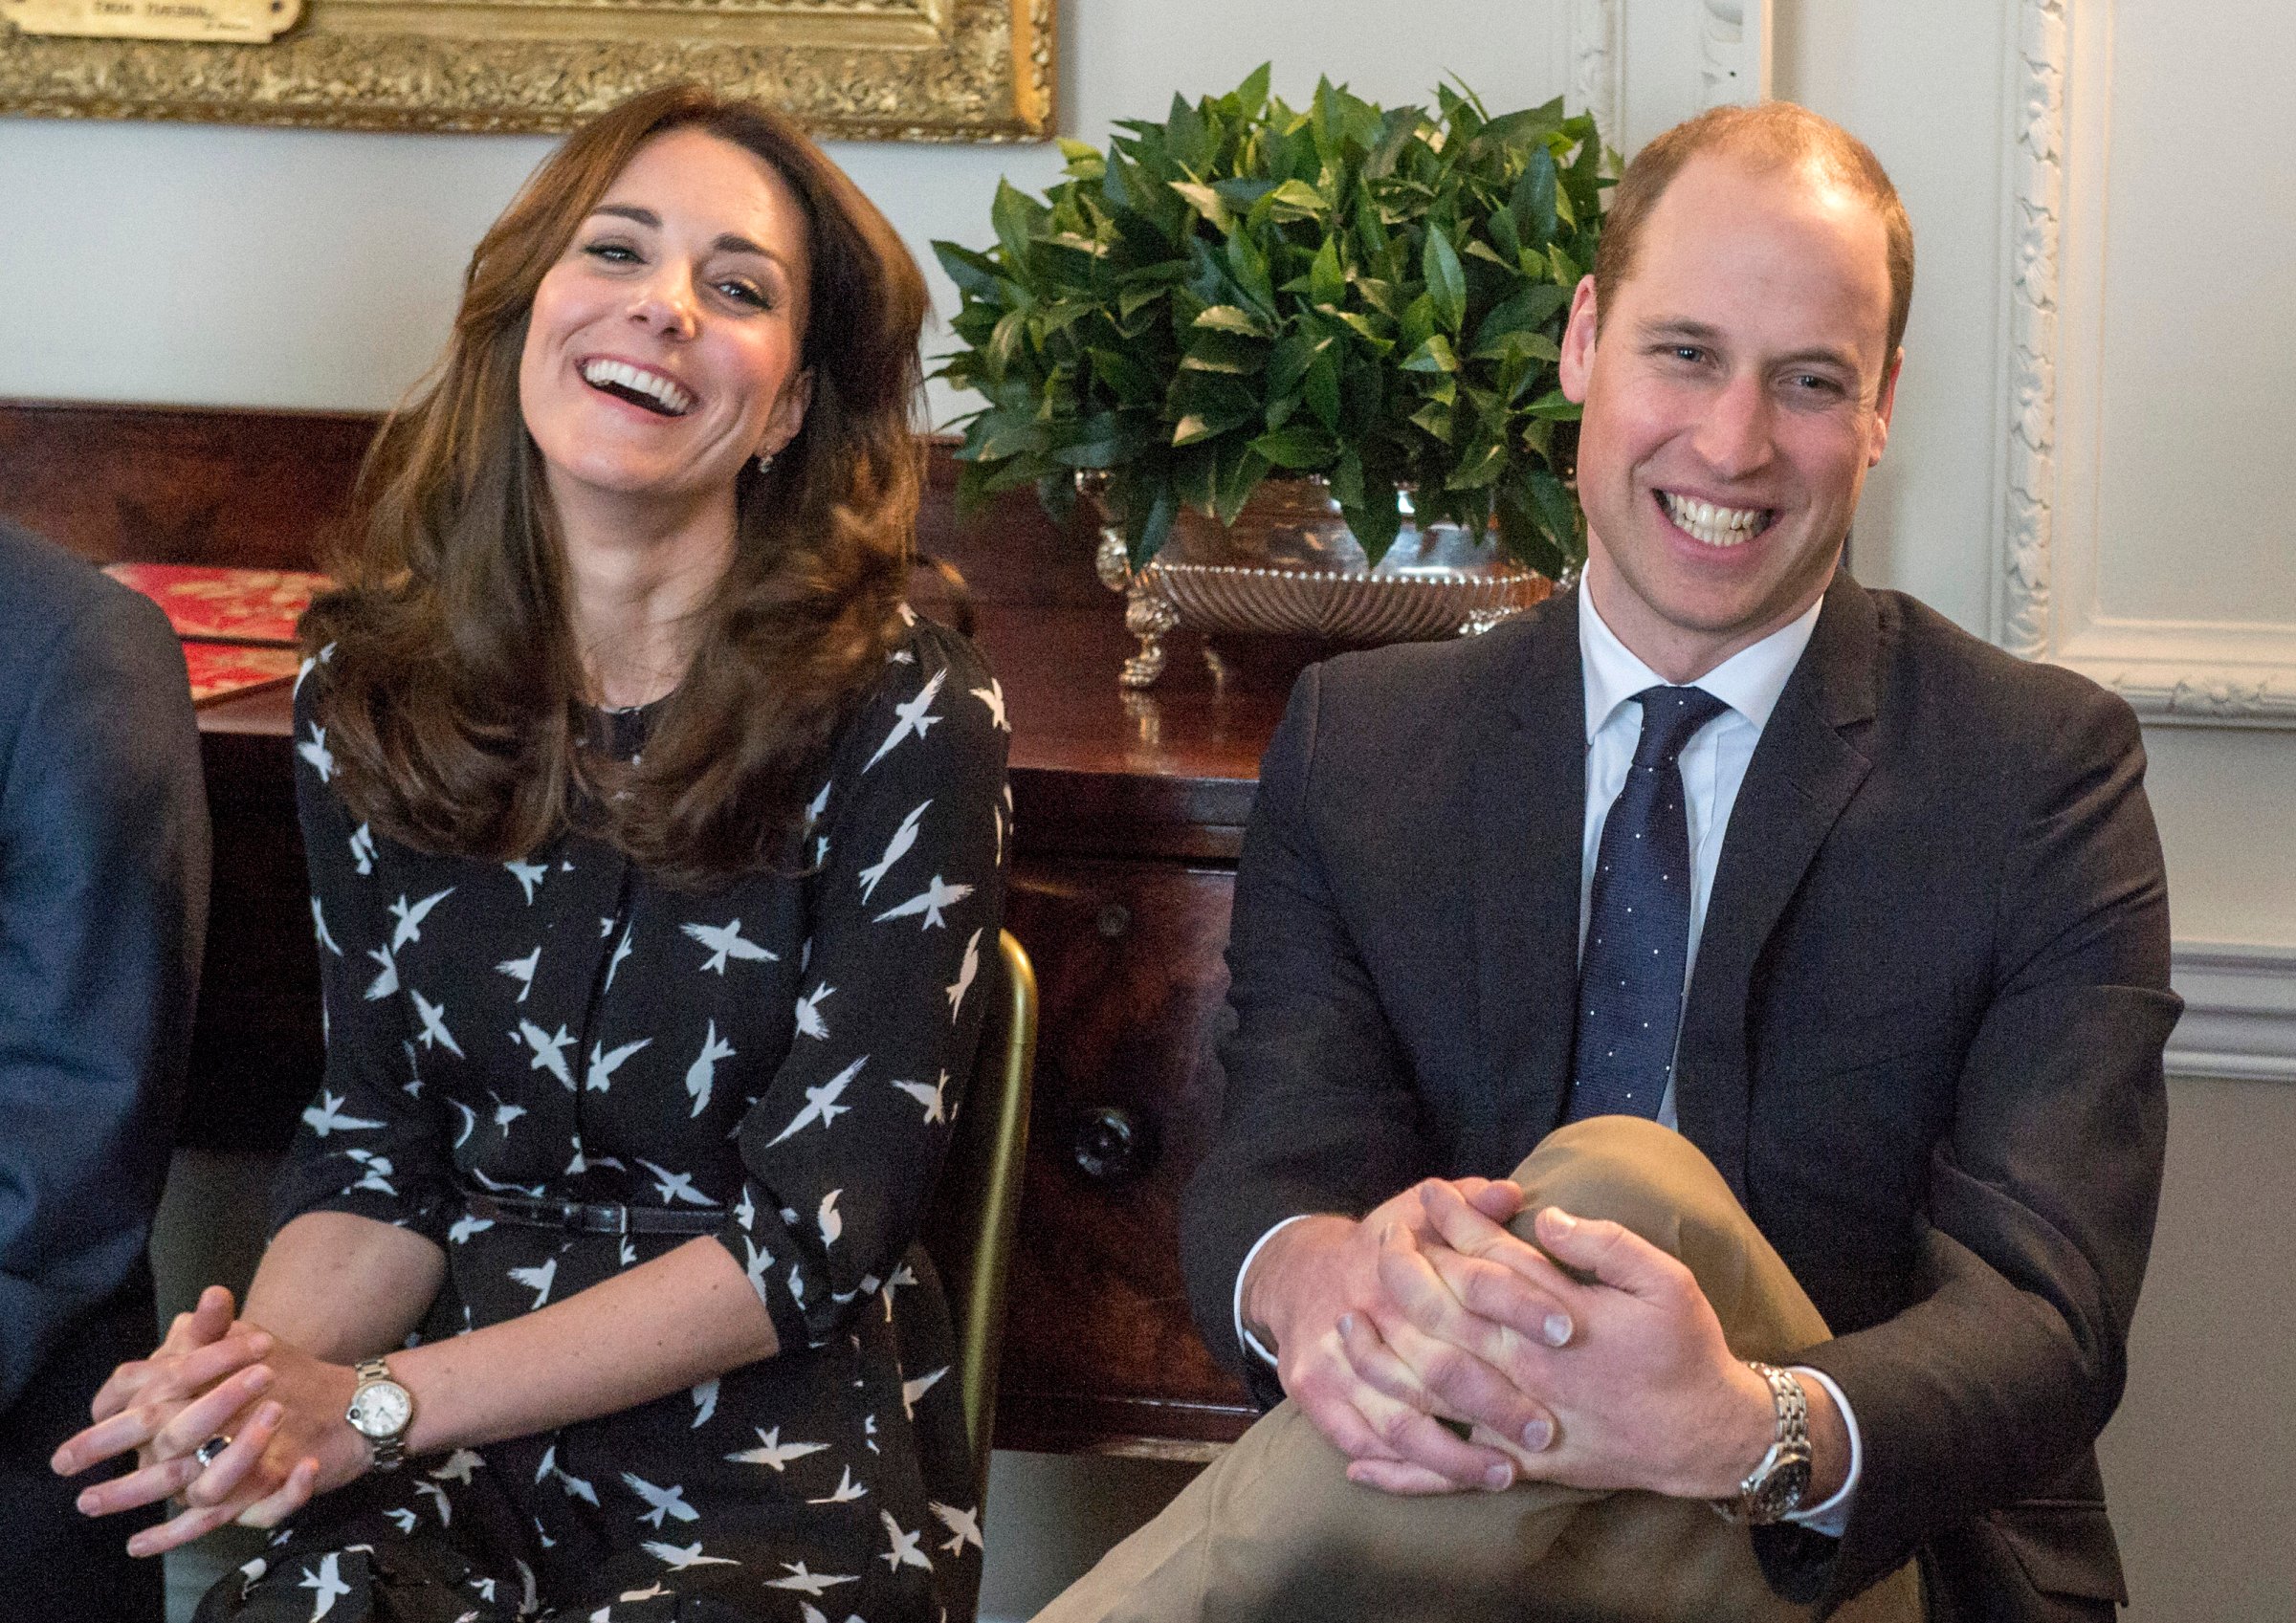 Catherine, Duchess of Cambridge and Prince William, Duke of Cambridge met with Jonny Benjamin and Neil Laybourn at Kensington Palace on March 10, 2016 in London, United Kingdom.